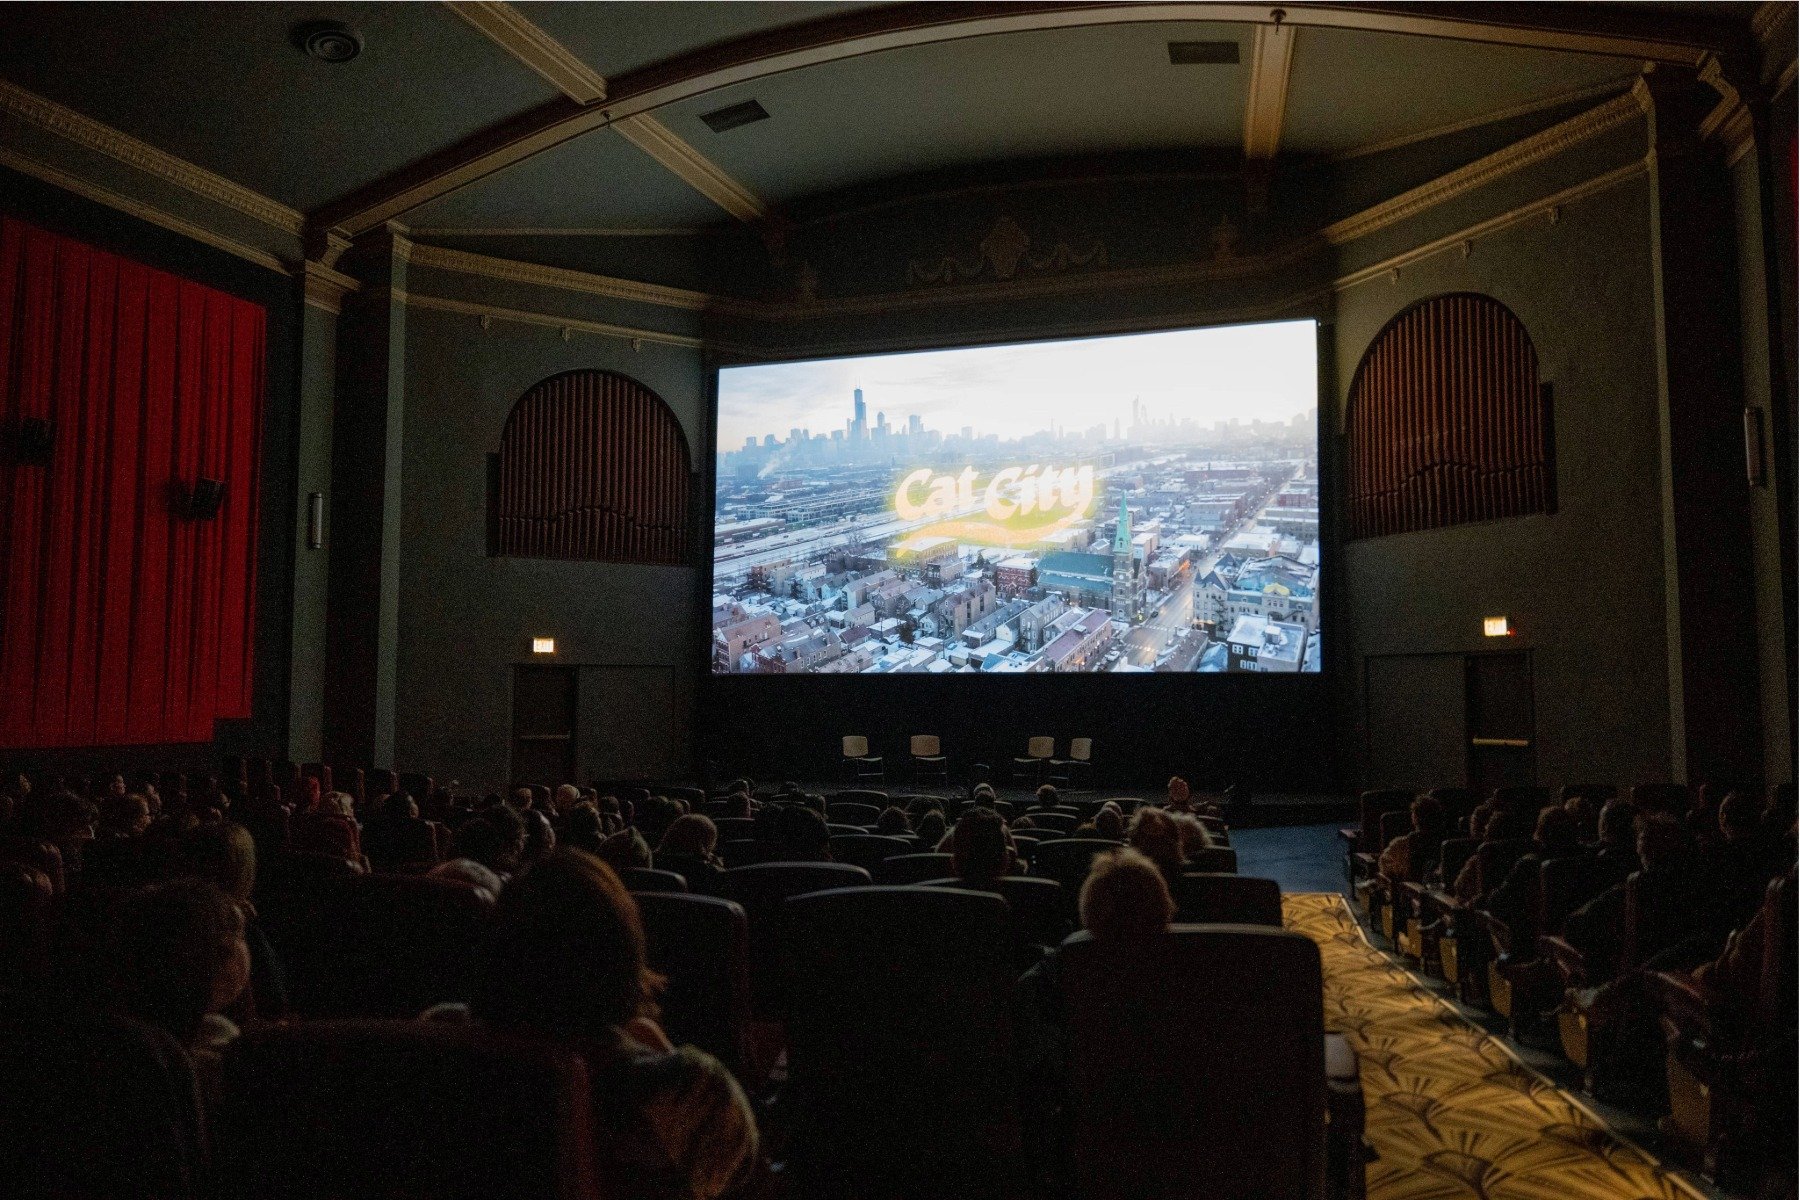 &quot;An edifying journey for cat lovers, nature lovers, and city dwellers alike, with plenty to amuse and ponder.&rdquo; &ndash;@kat_sachs, Cine-List

Thanks to everyone who came out to our @davistheater #premiere of Cat City last Wednesday and to o